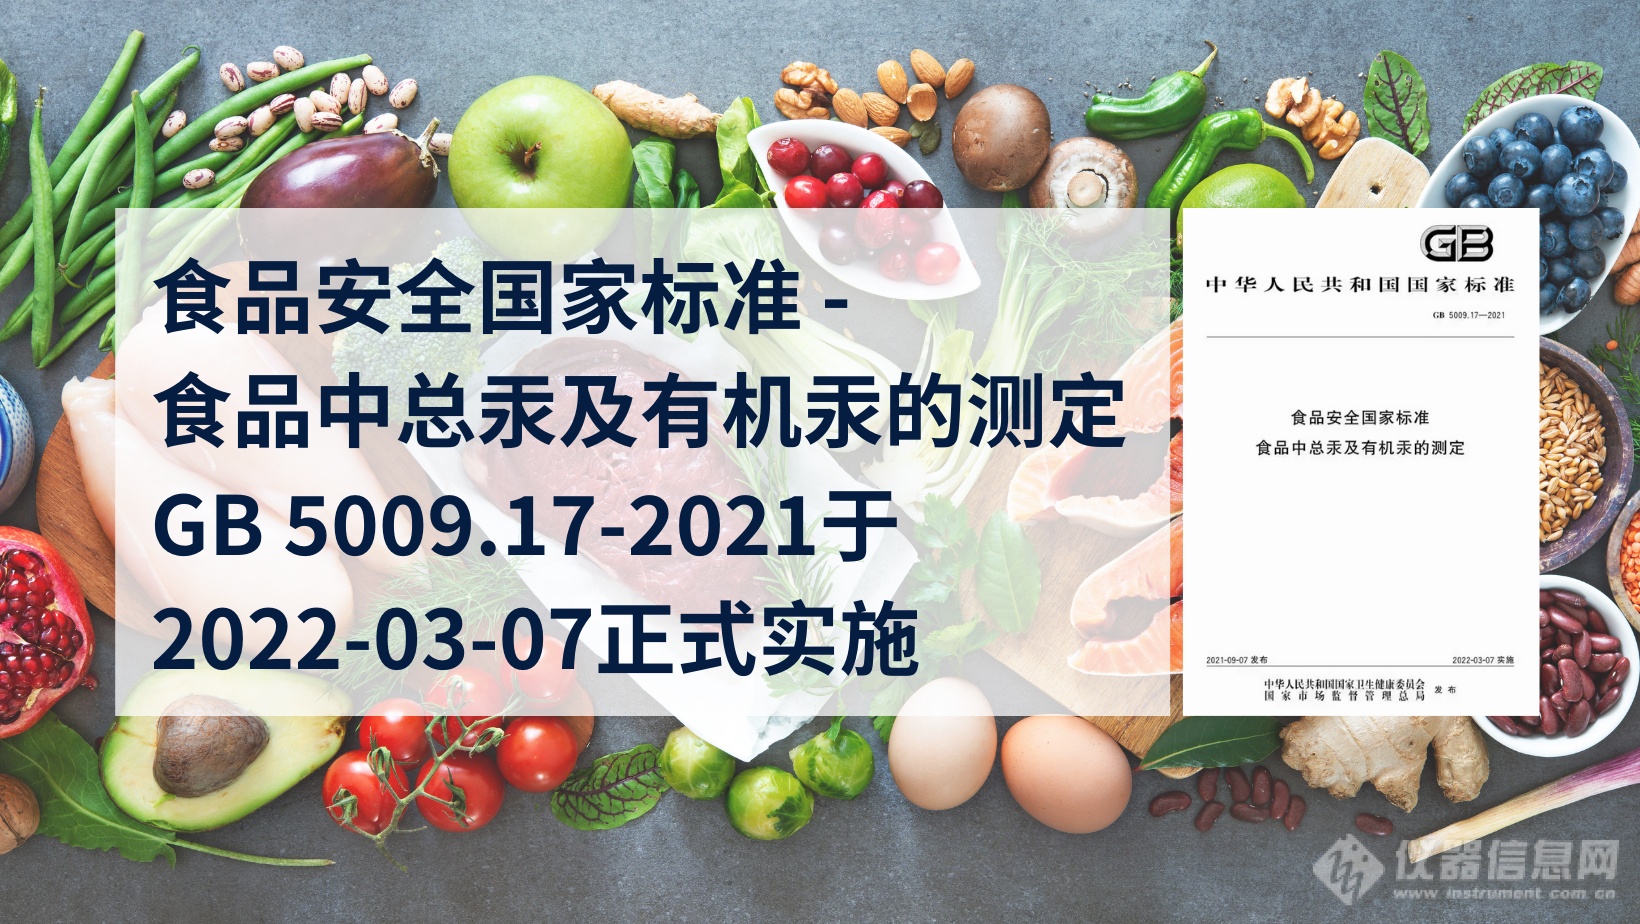 announcement 7th March (300 × 200 px) (1640 × 924 px).png